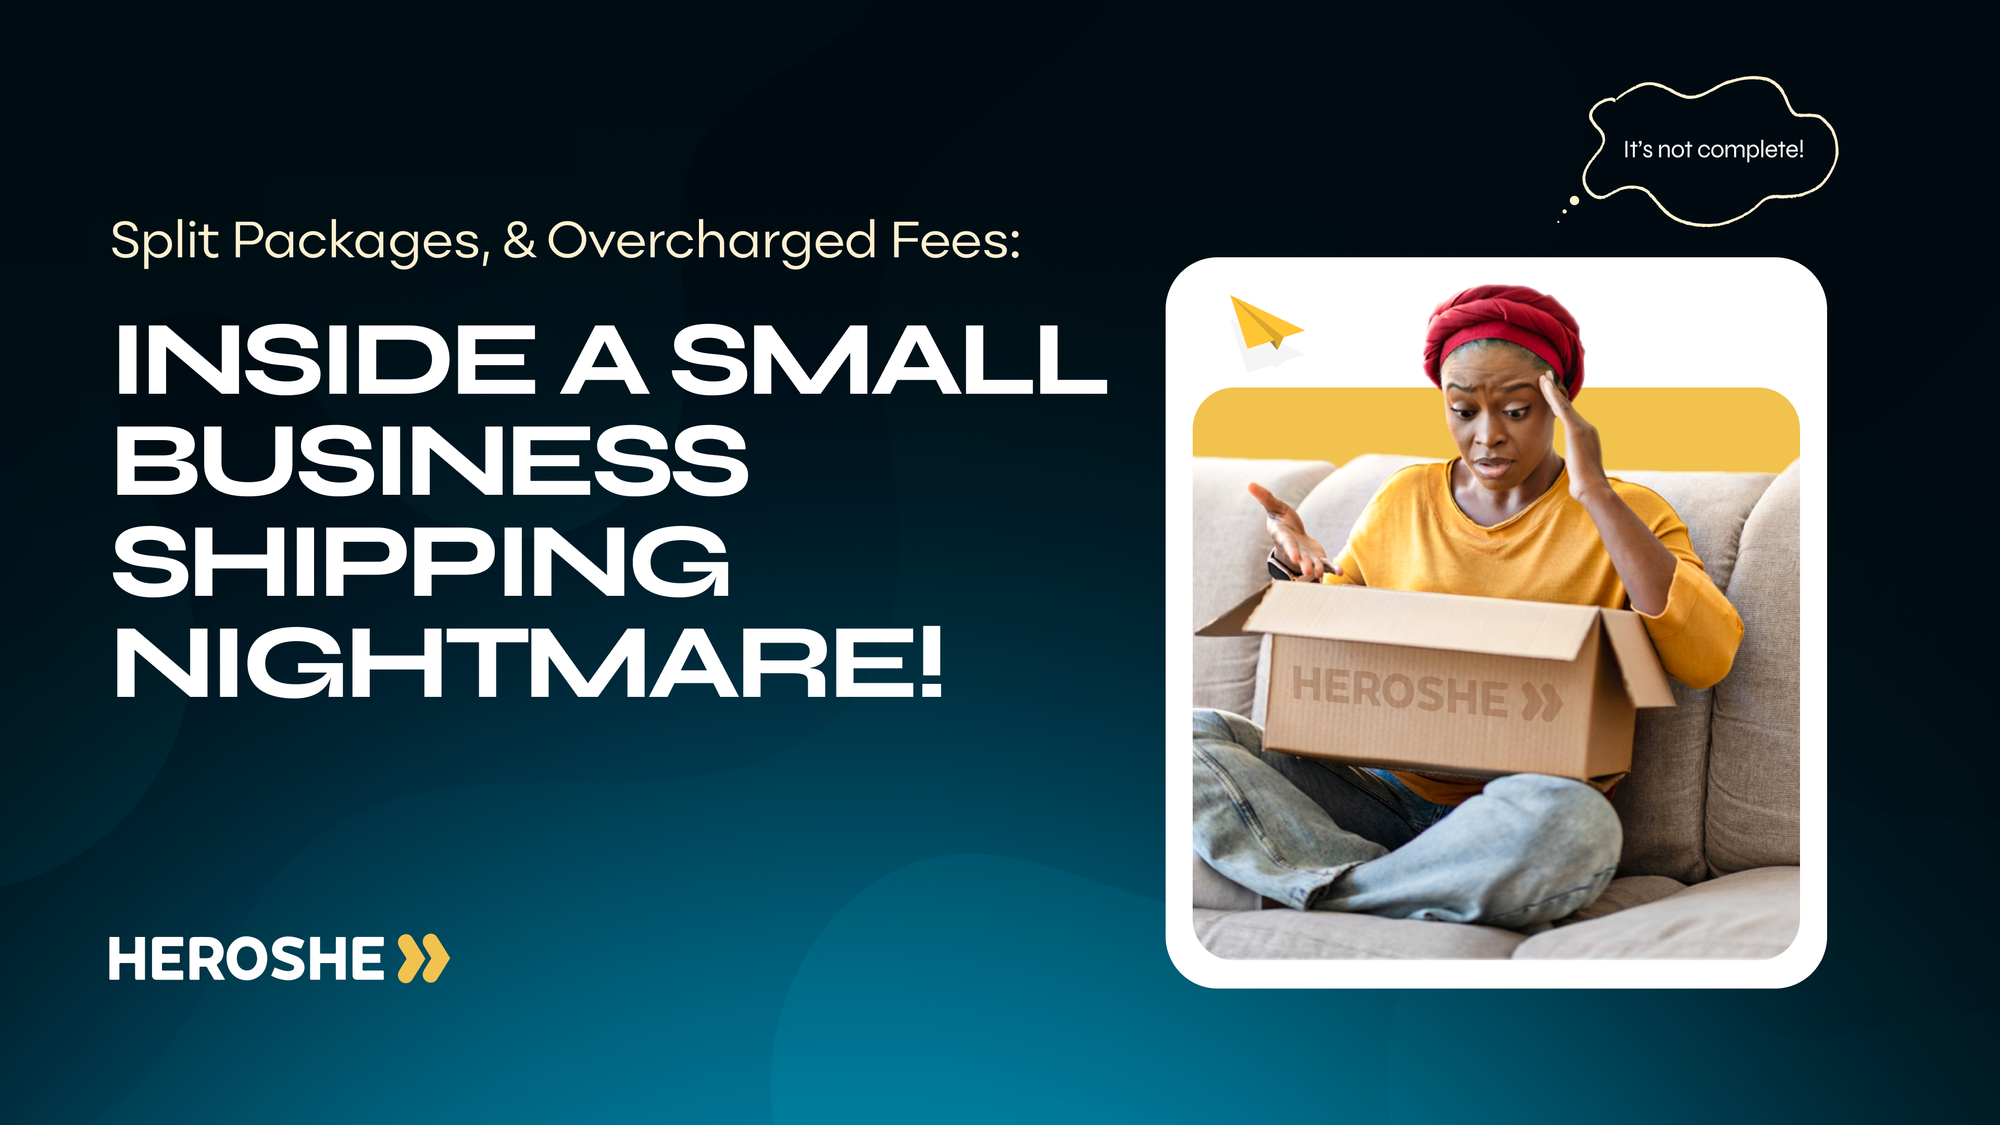 Split Packages and Overcharged Fees: Inside a Small Business Shipping Nightmare